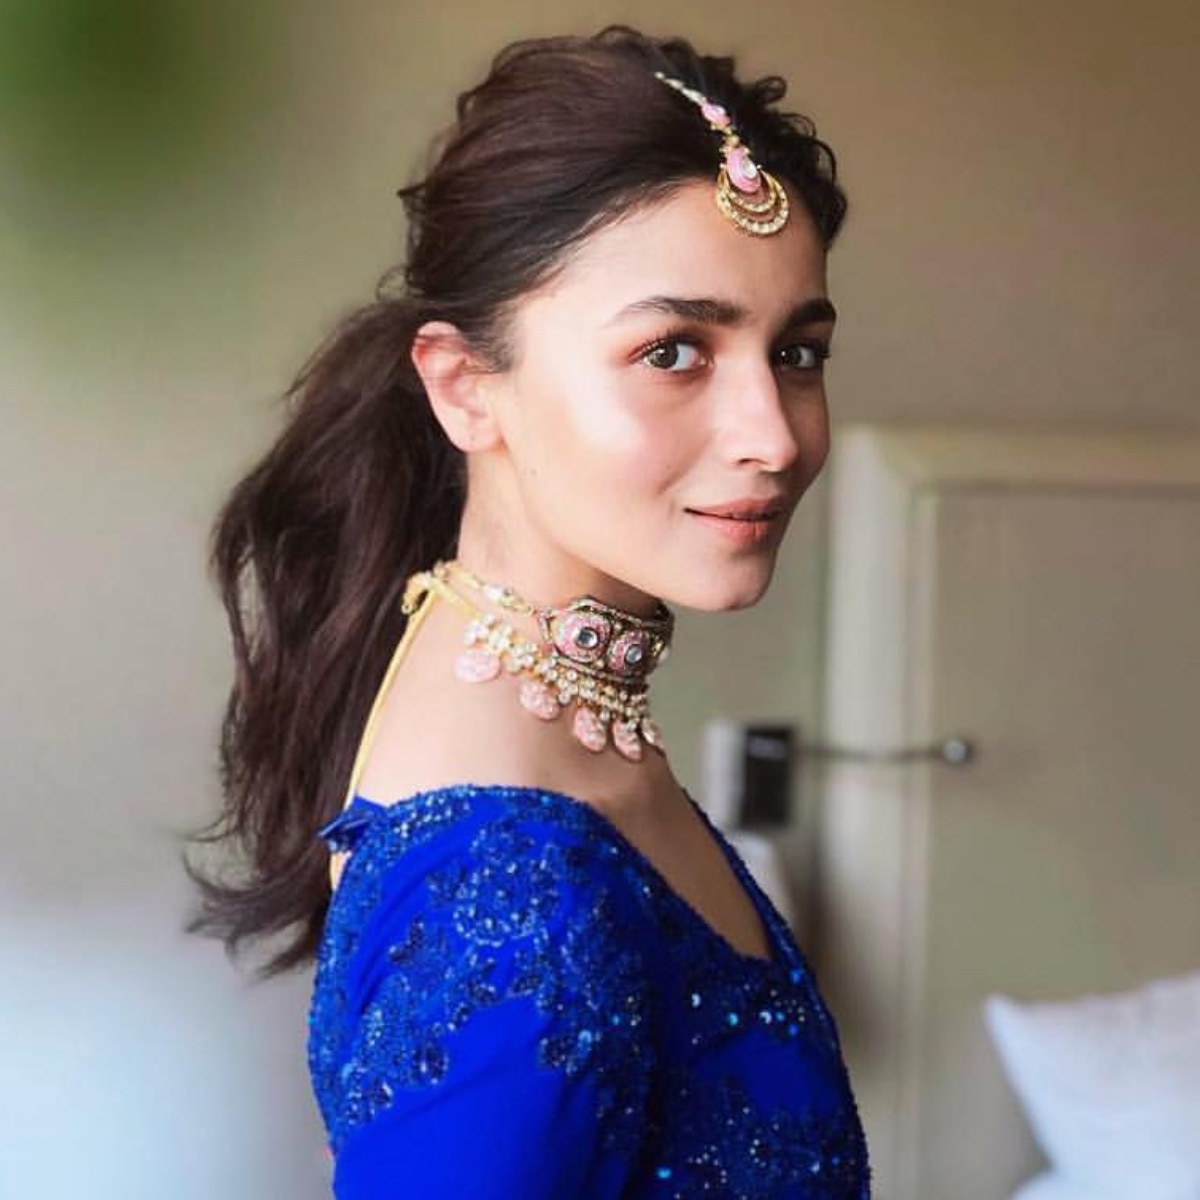 For A Unique Good Bridal Hairstyle Take Inspiration From These Bollywood  Celebrates Make Your Wedding Look Memorable  Best Bridal Hairstyle शद  पर बनन चहत ह एक अचछ जड त इन एकटरस